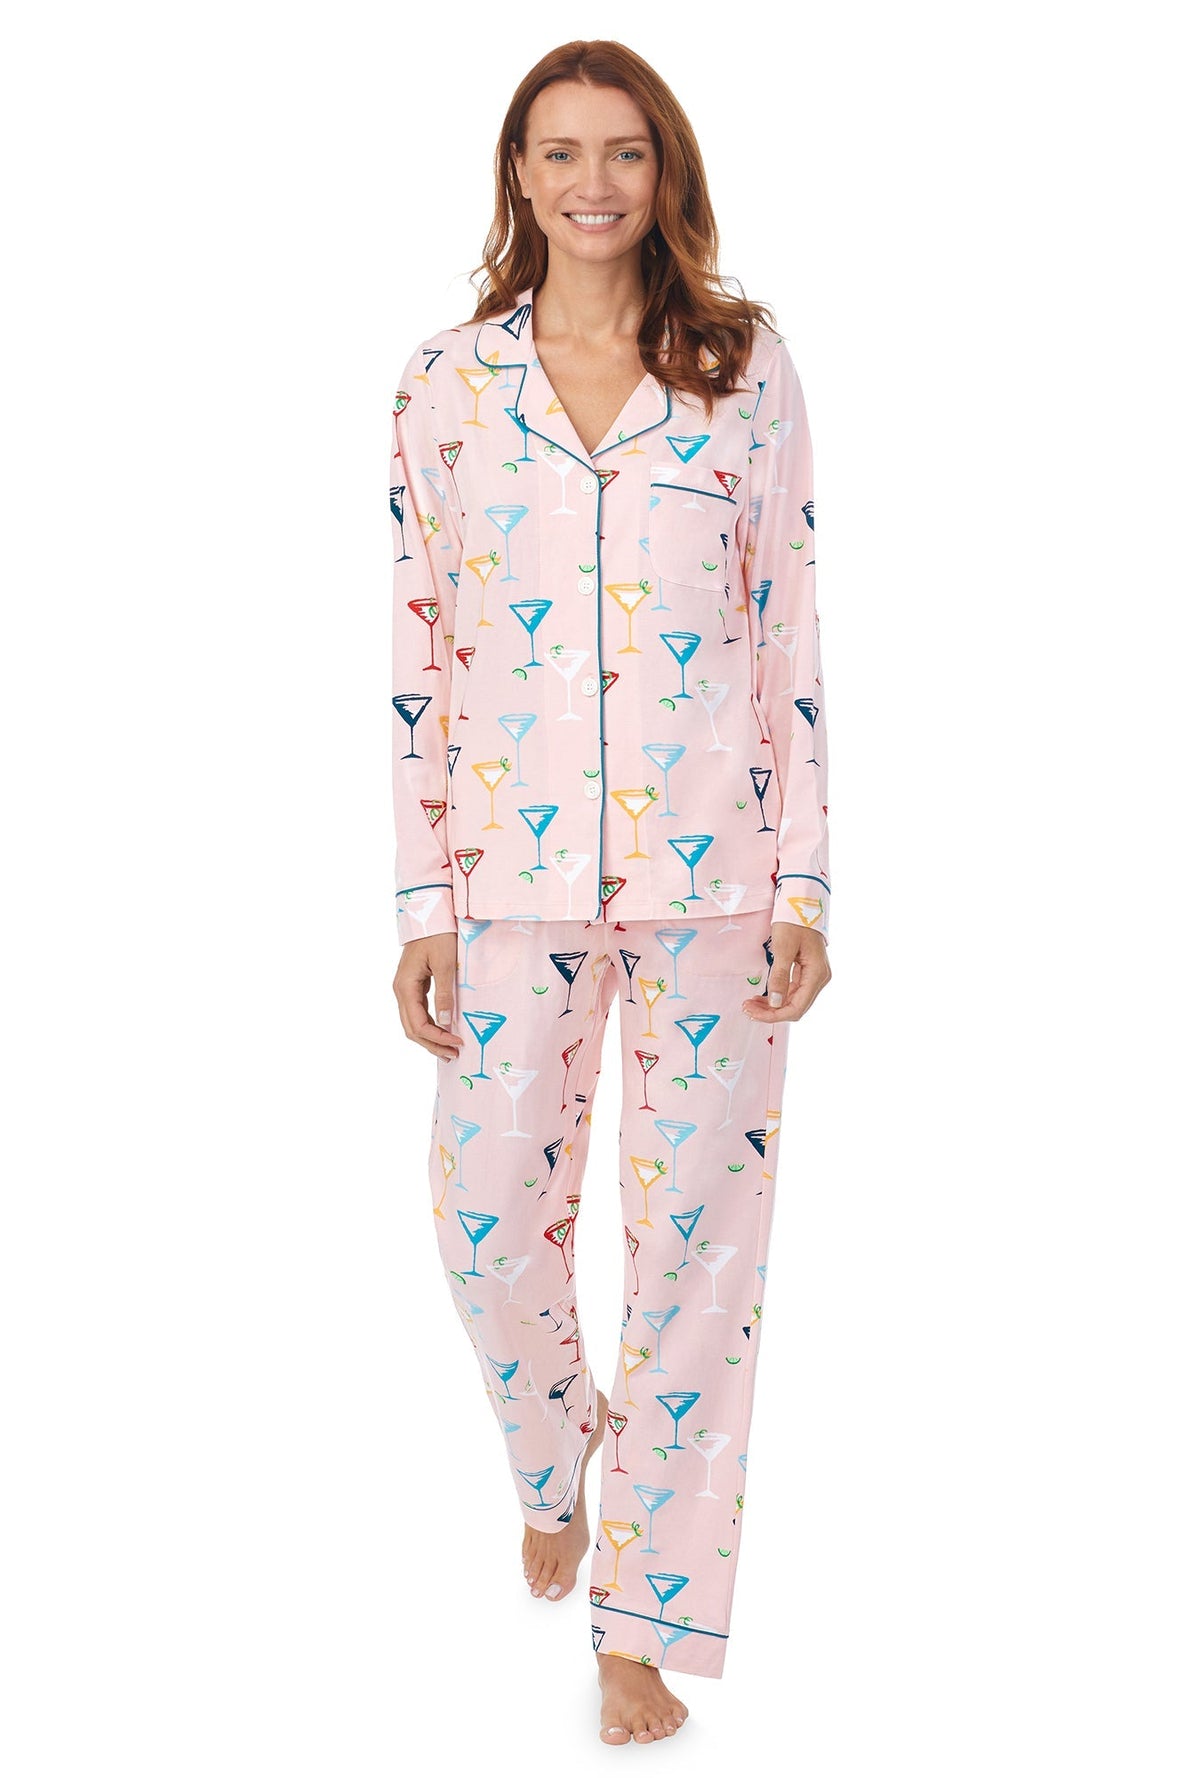 A lady wearing a pink long sleeve pj set with glass pattern.